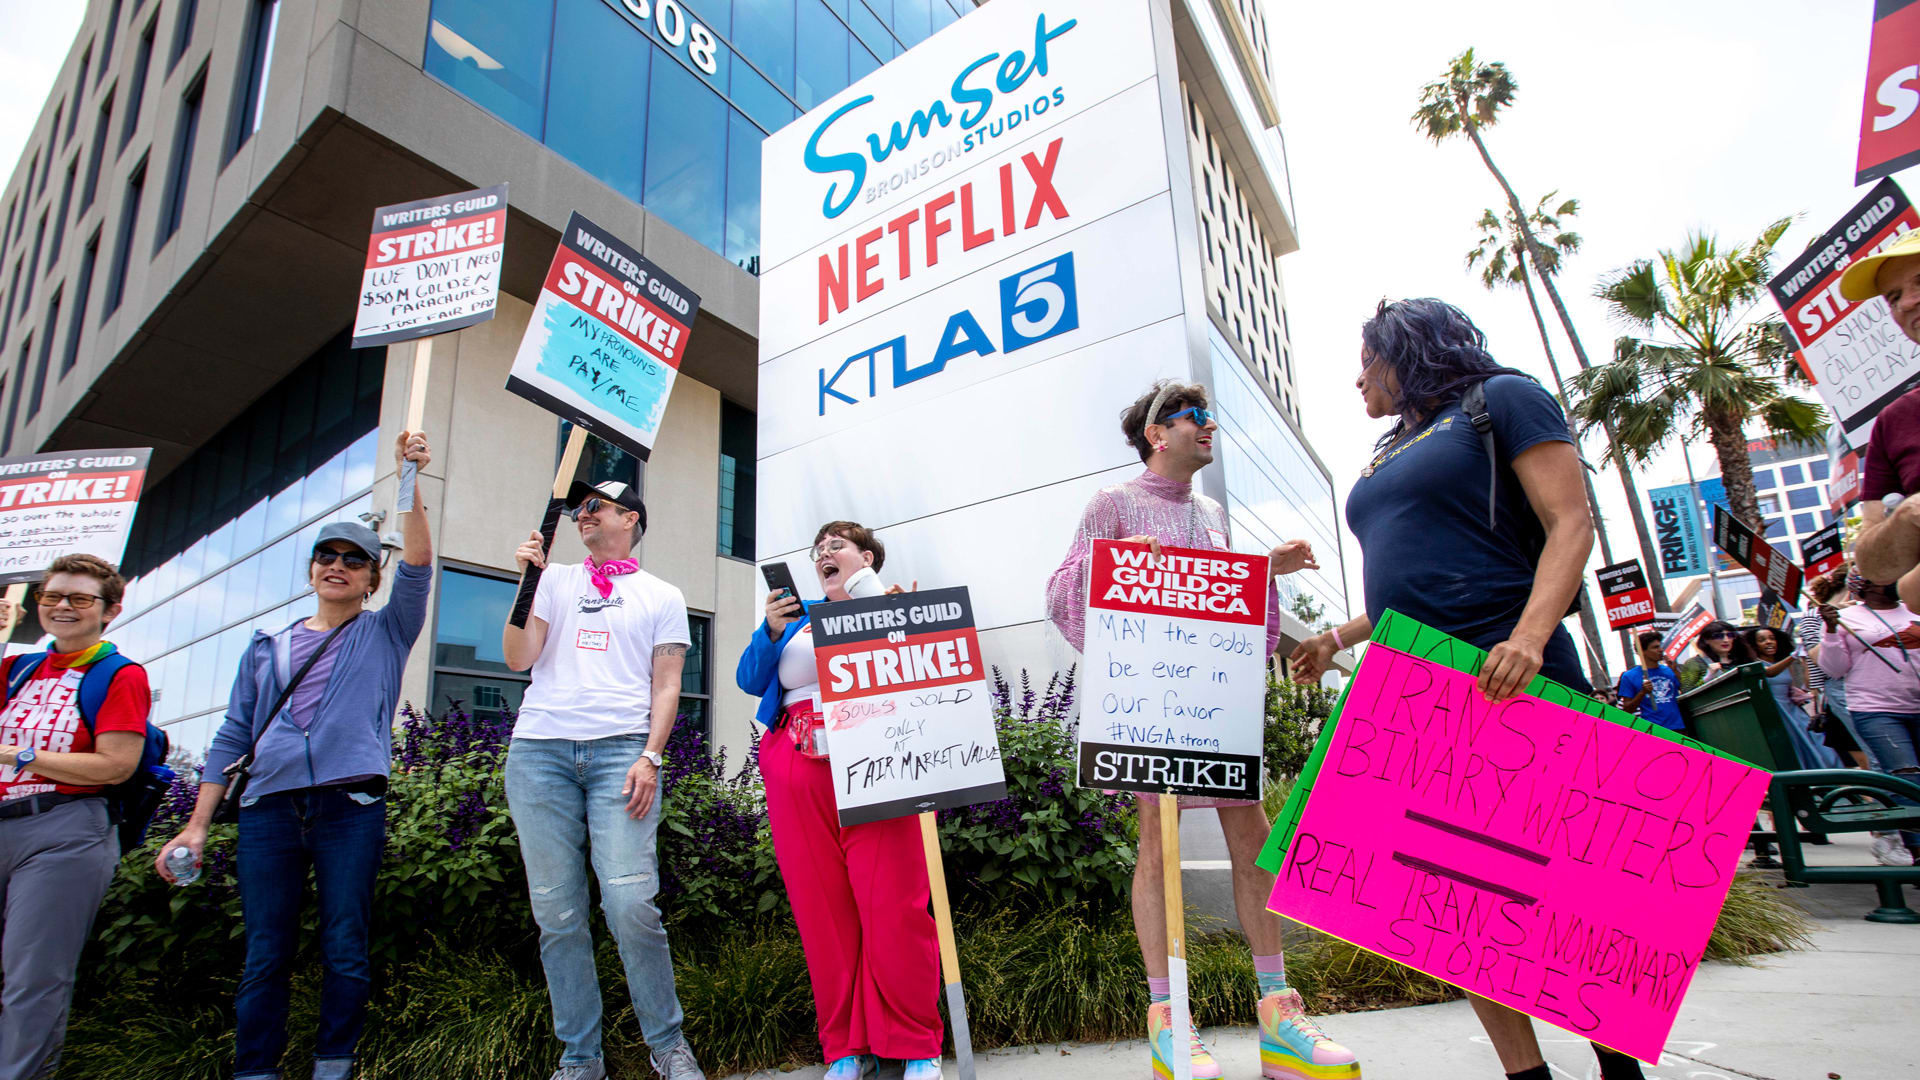 How much is the writers’ strike costing?